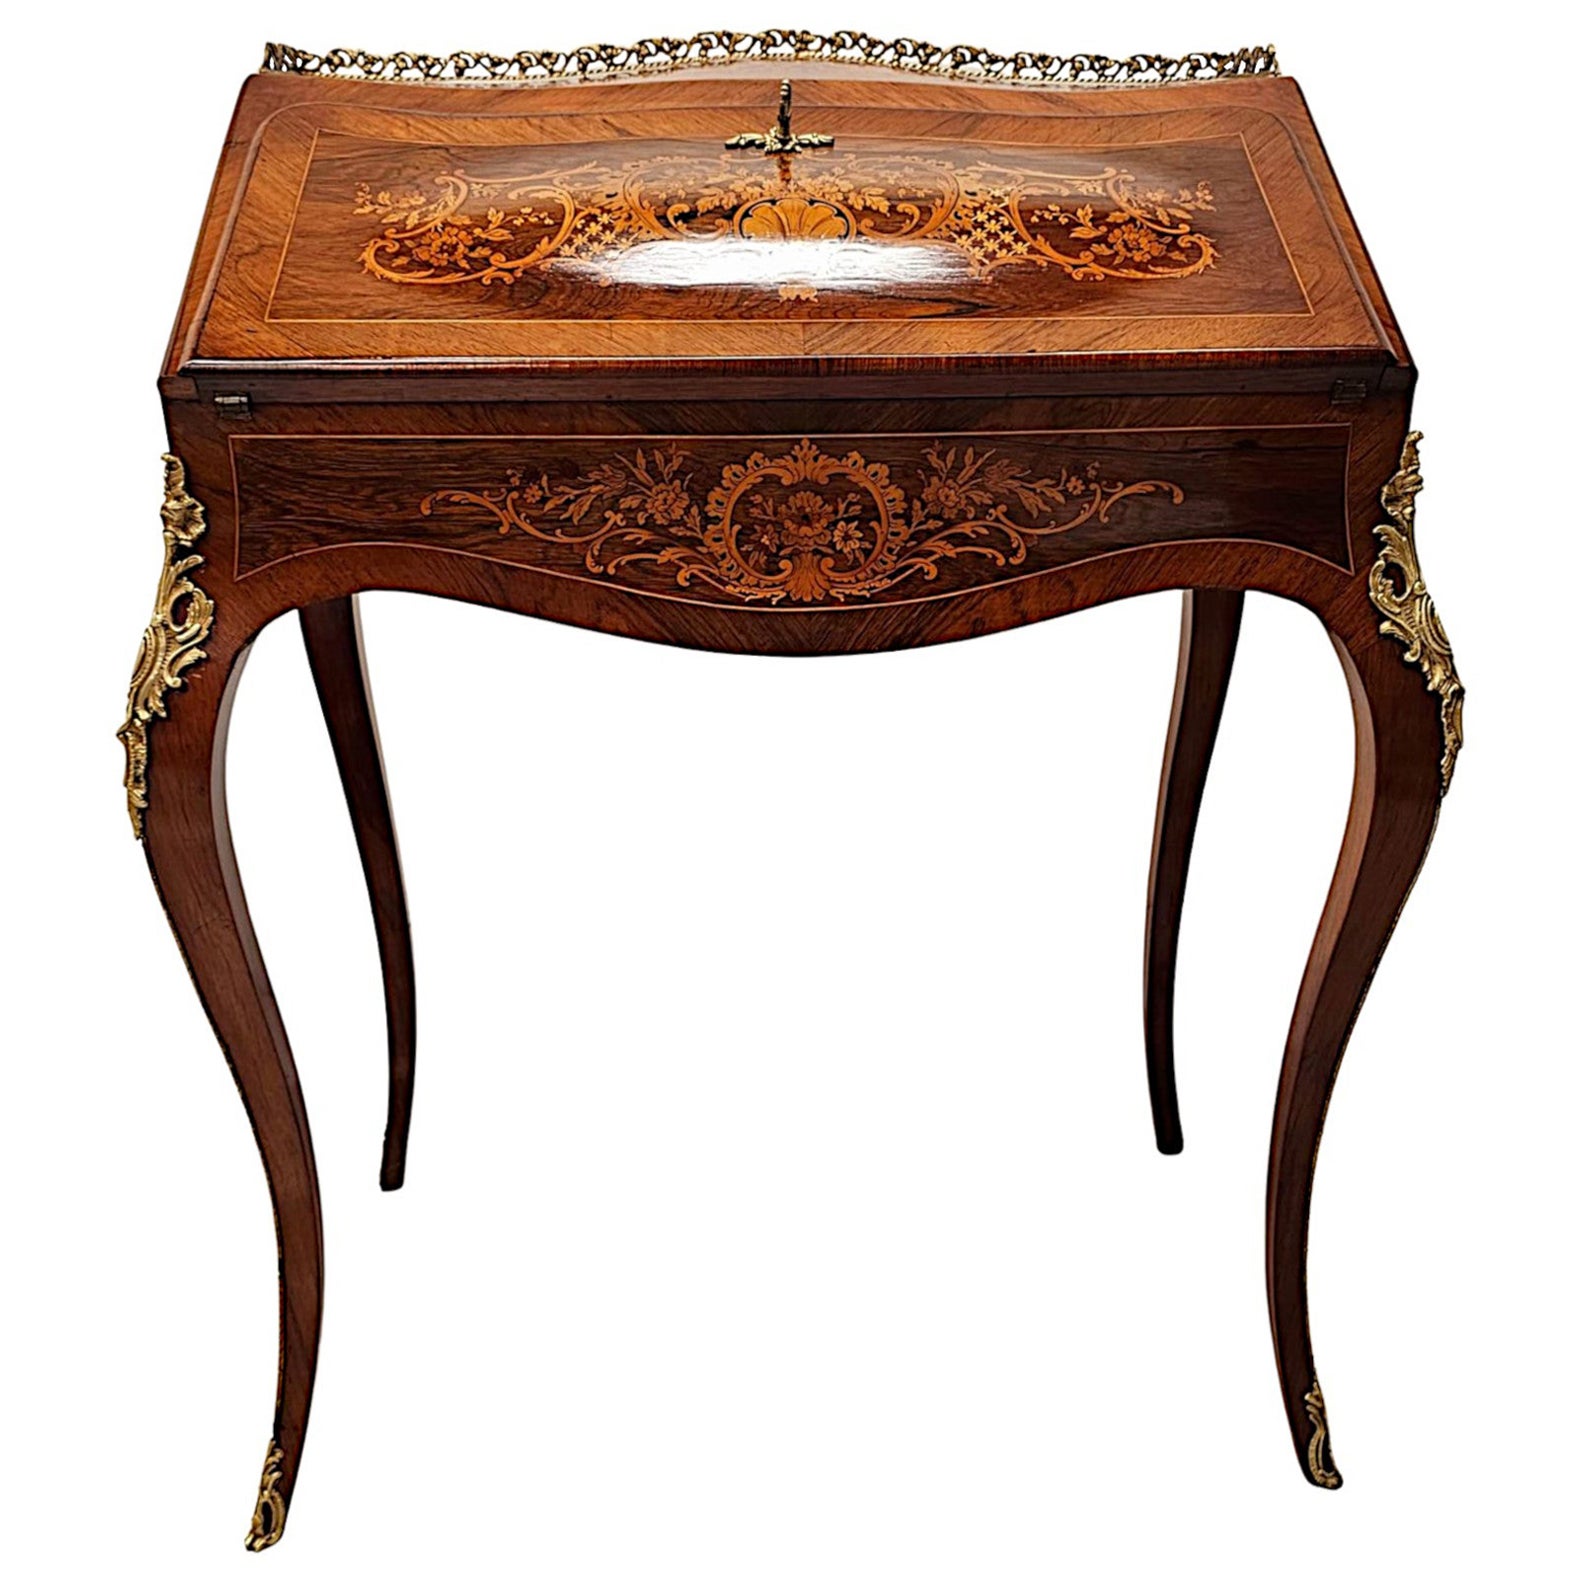 A Very Fine 19th Century Marquetry Inlaid Bureau Du Dame For Sale